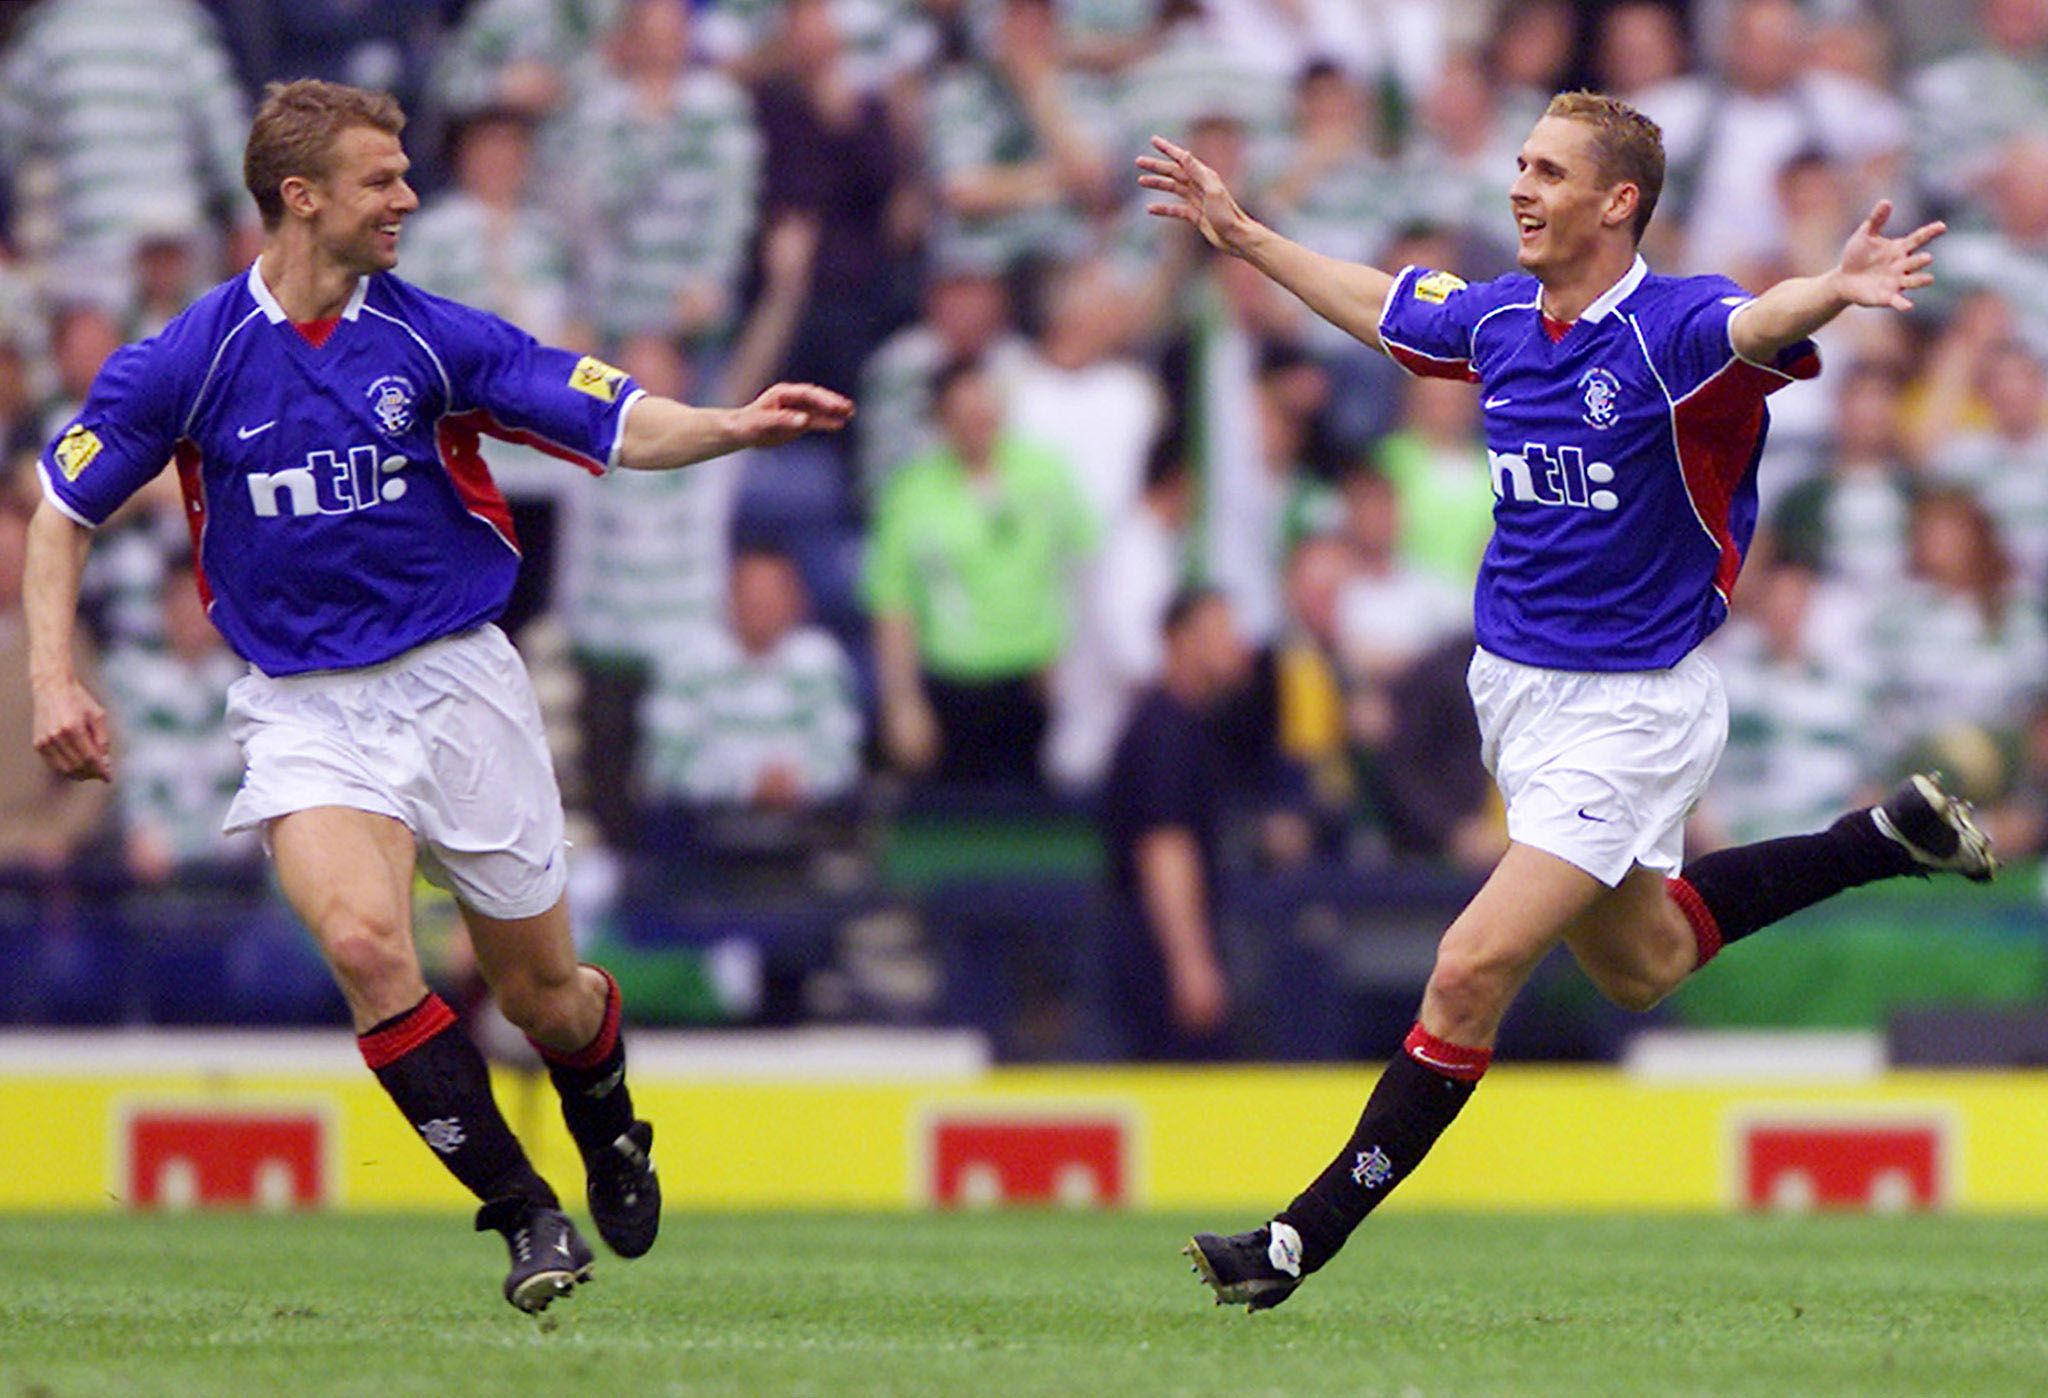 RANGERS' LOVENKRANDS CELEBRATES WITH NUMAN AFTER SCORING AGAINST CELTIC
IN THE SCOTTISH FA CUP FINAL AT HAMPDEN PARK.

	
Rangers' Peter Lovenkrands (R) celebrates scoring against Celtic with
Arthur Numan (L) in the Scottish FA Cup Final at Hampden Park, Glasgow,
Scotland, May 4, 2002. The match finished 3-2 to Rangers. REUTERS/Jeff
J Mitchell